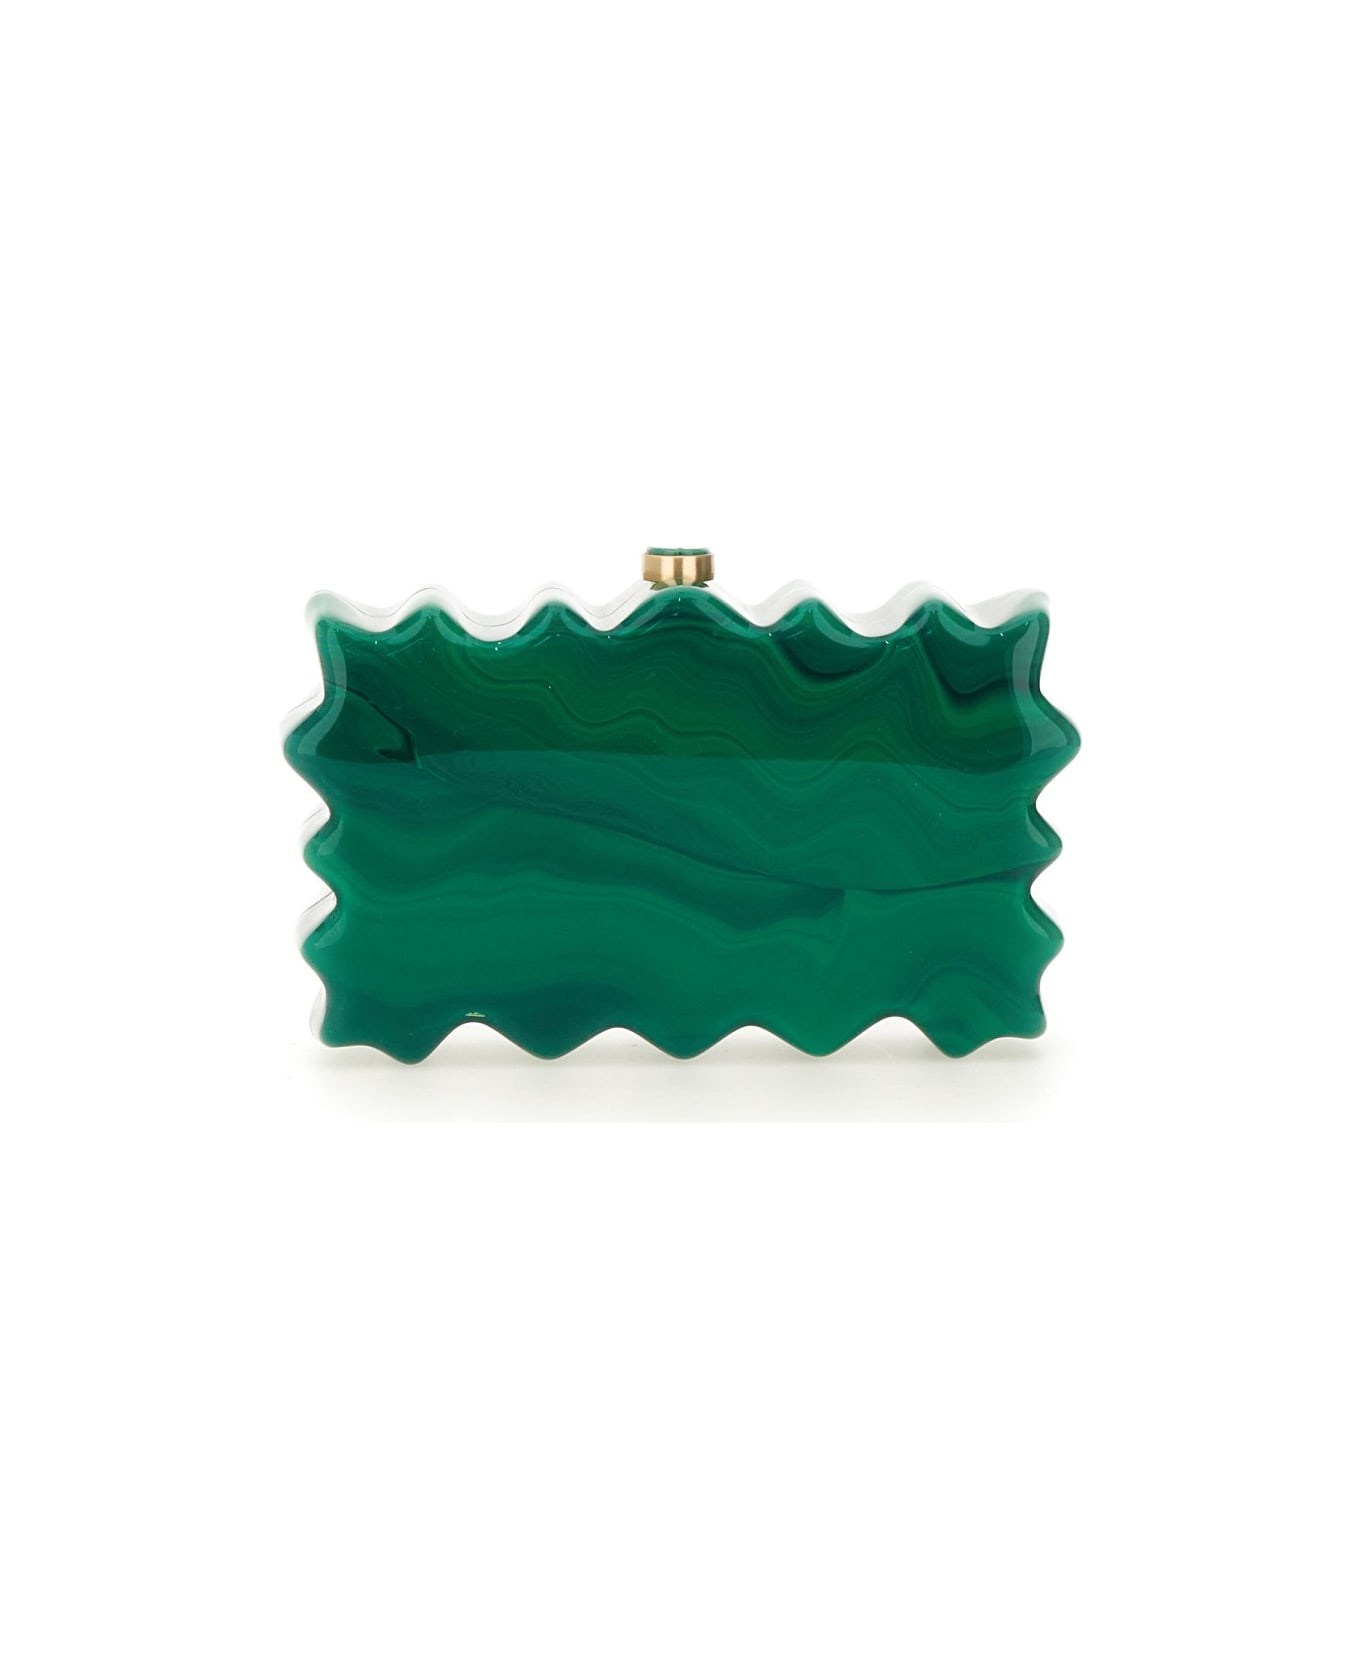 Cult Gaia Clutch Bag "paloma" - GREEN クラッチバッグ